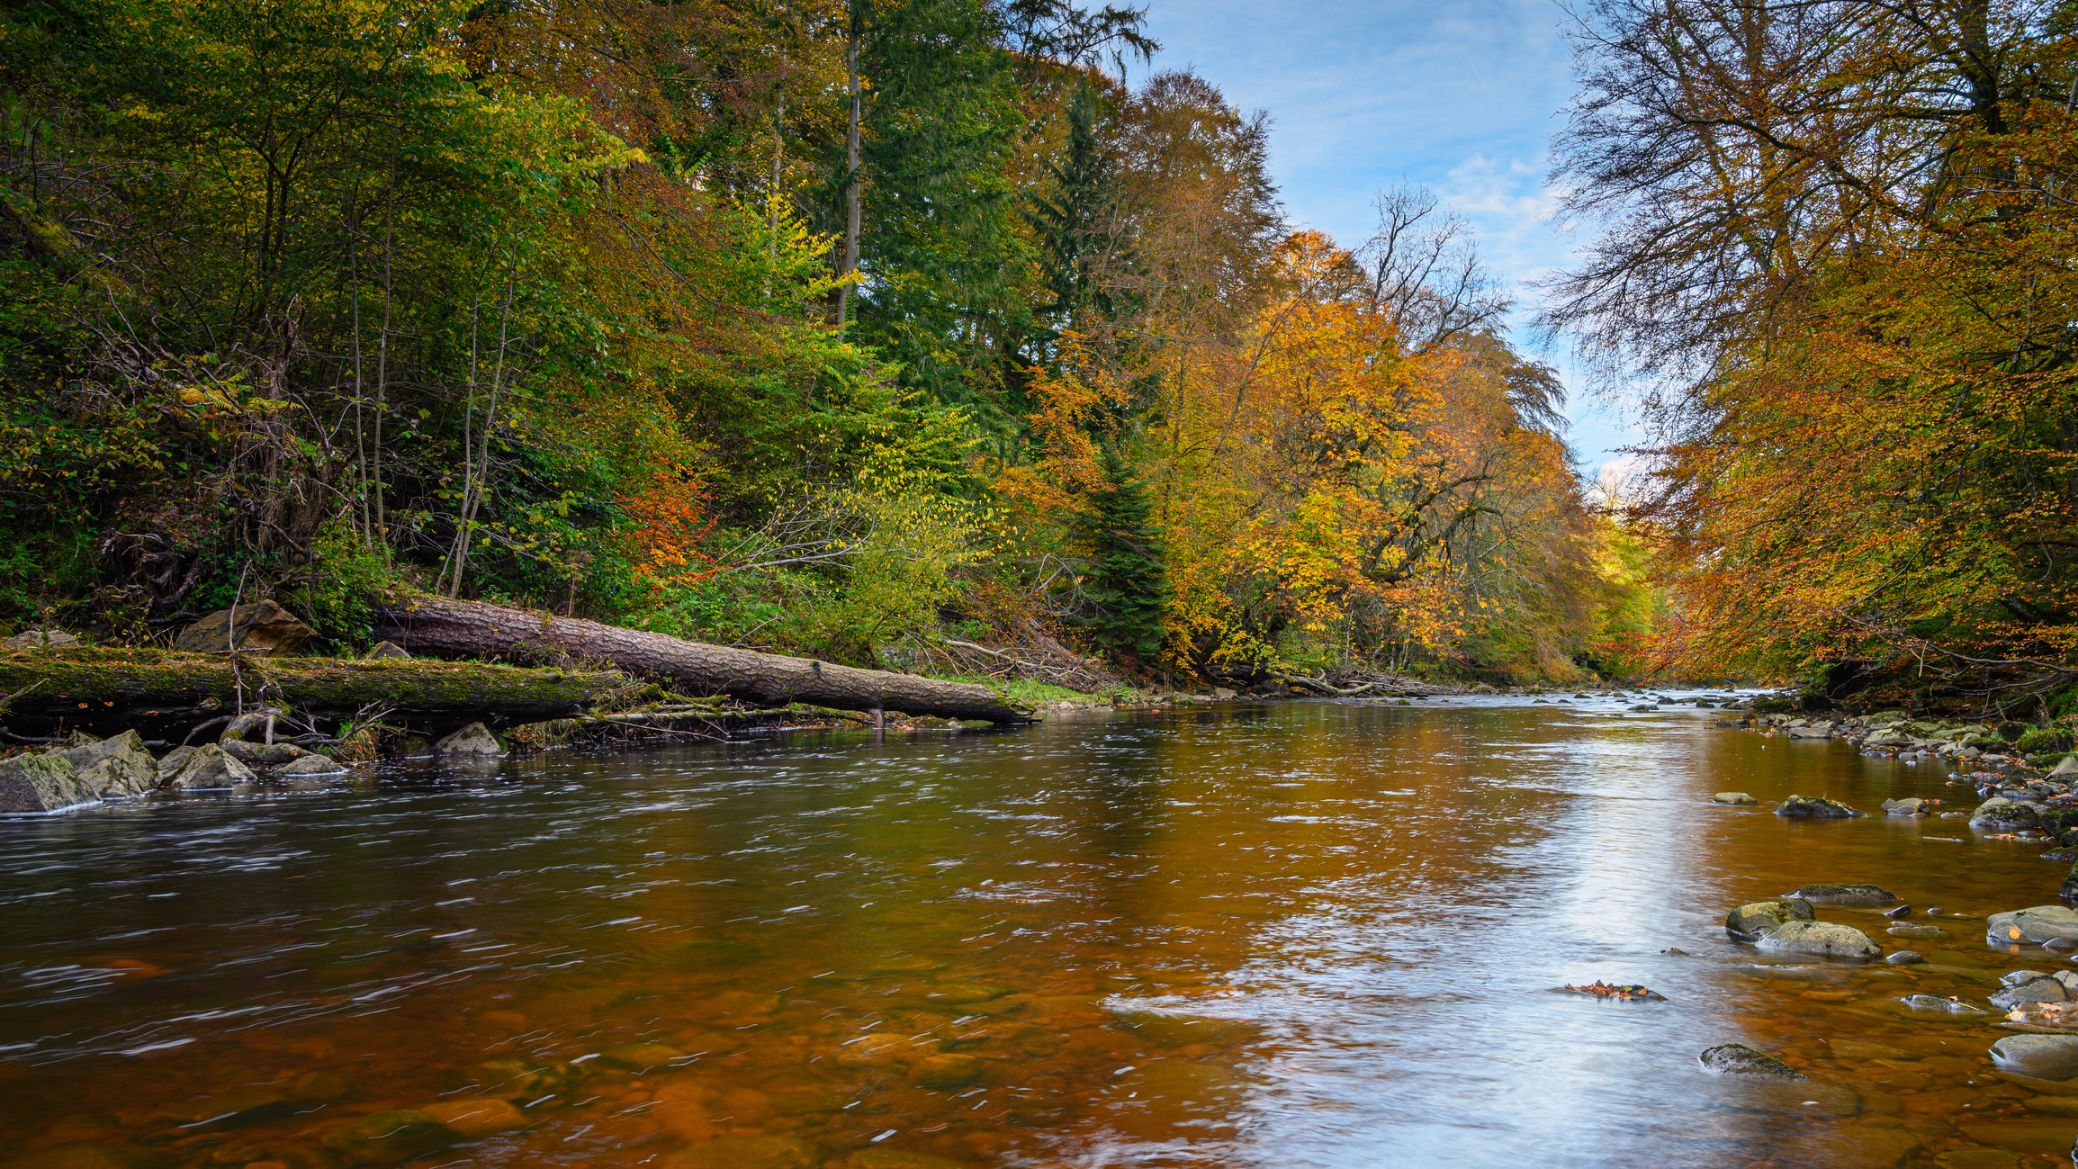 Allen Banks and Staward Gorge in the English county of Northumberland.